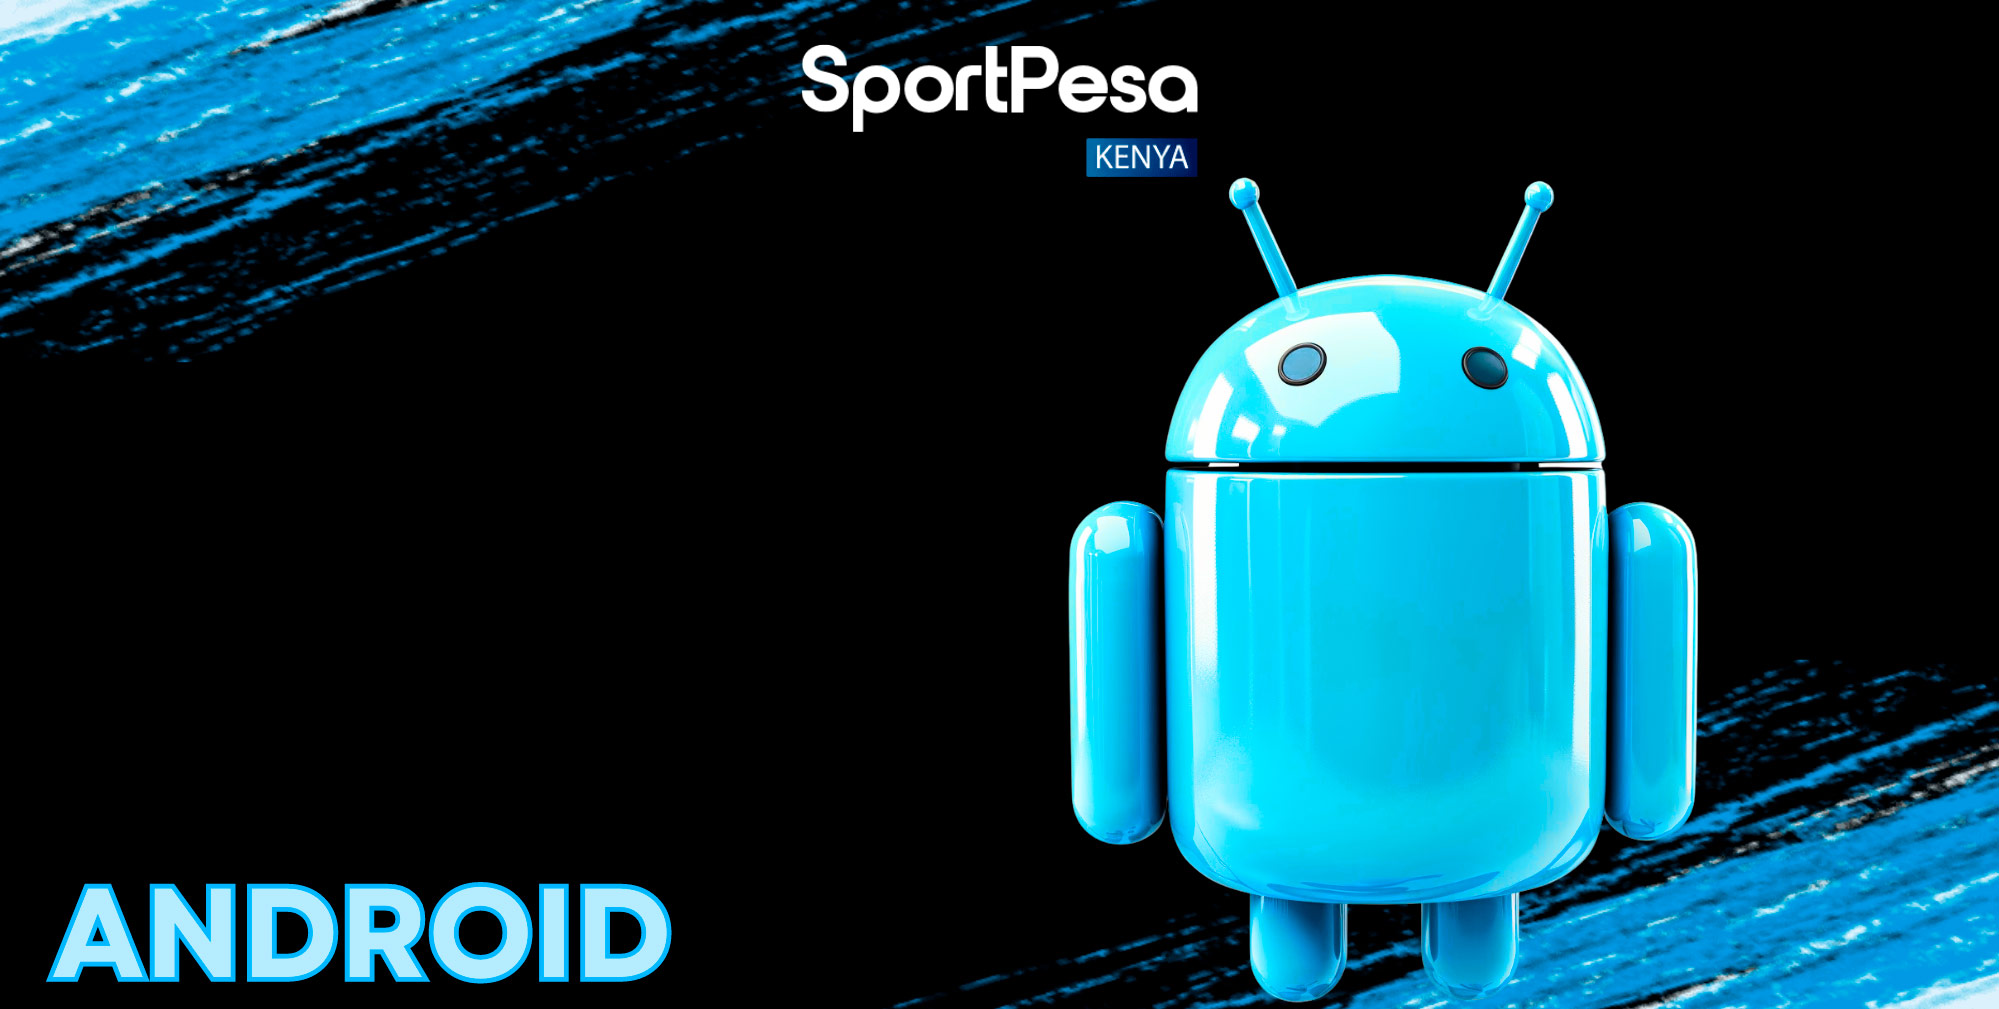 The Sportpesa app for Android